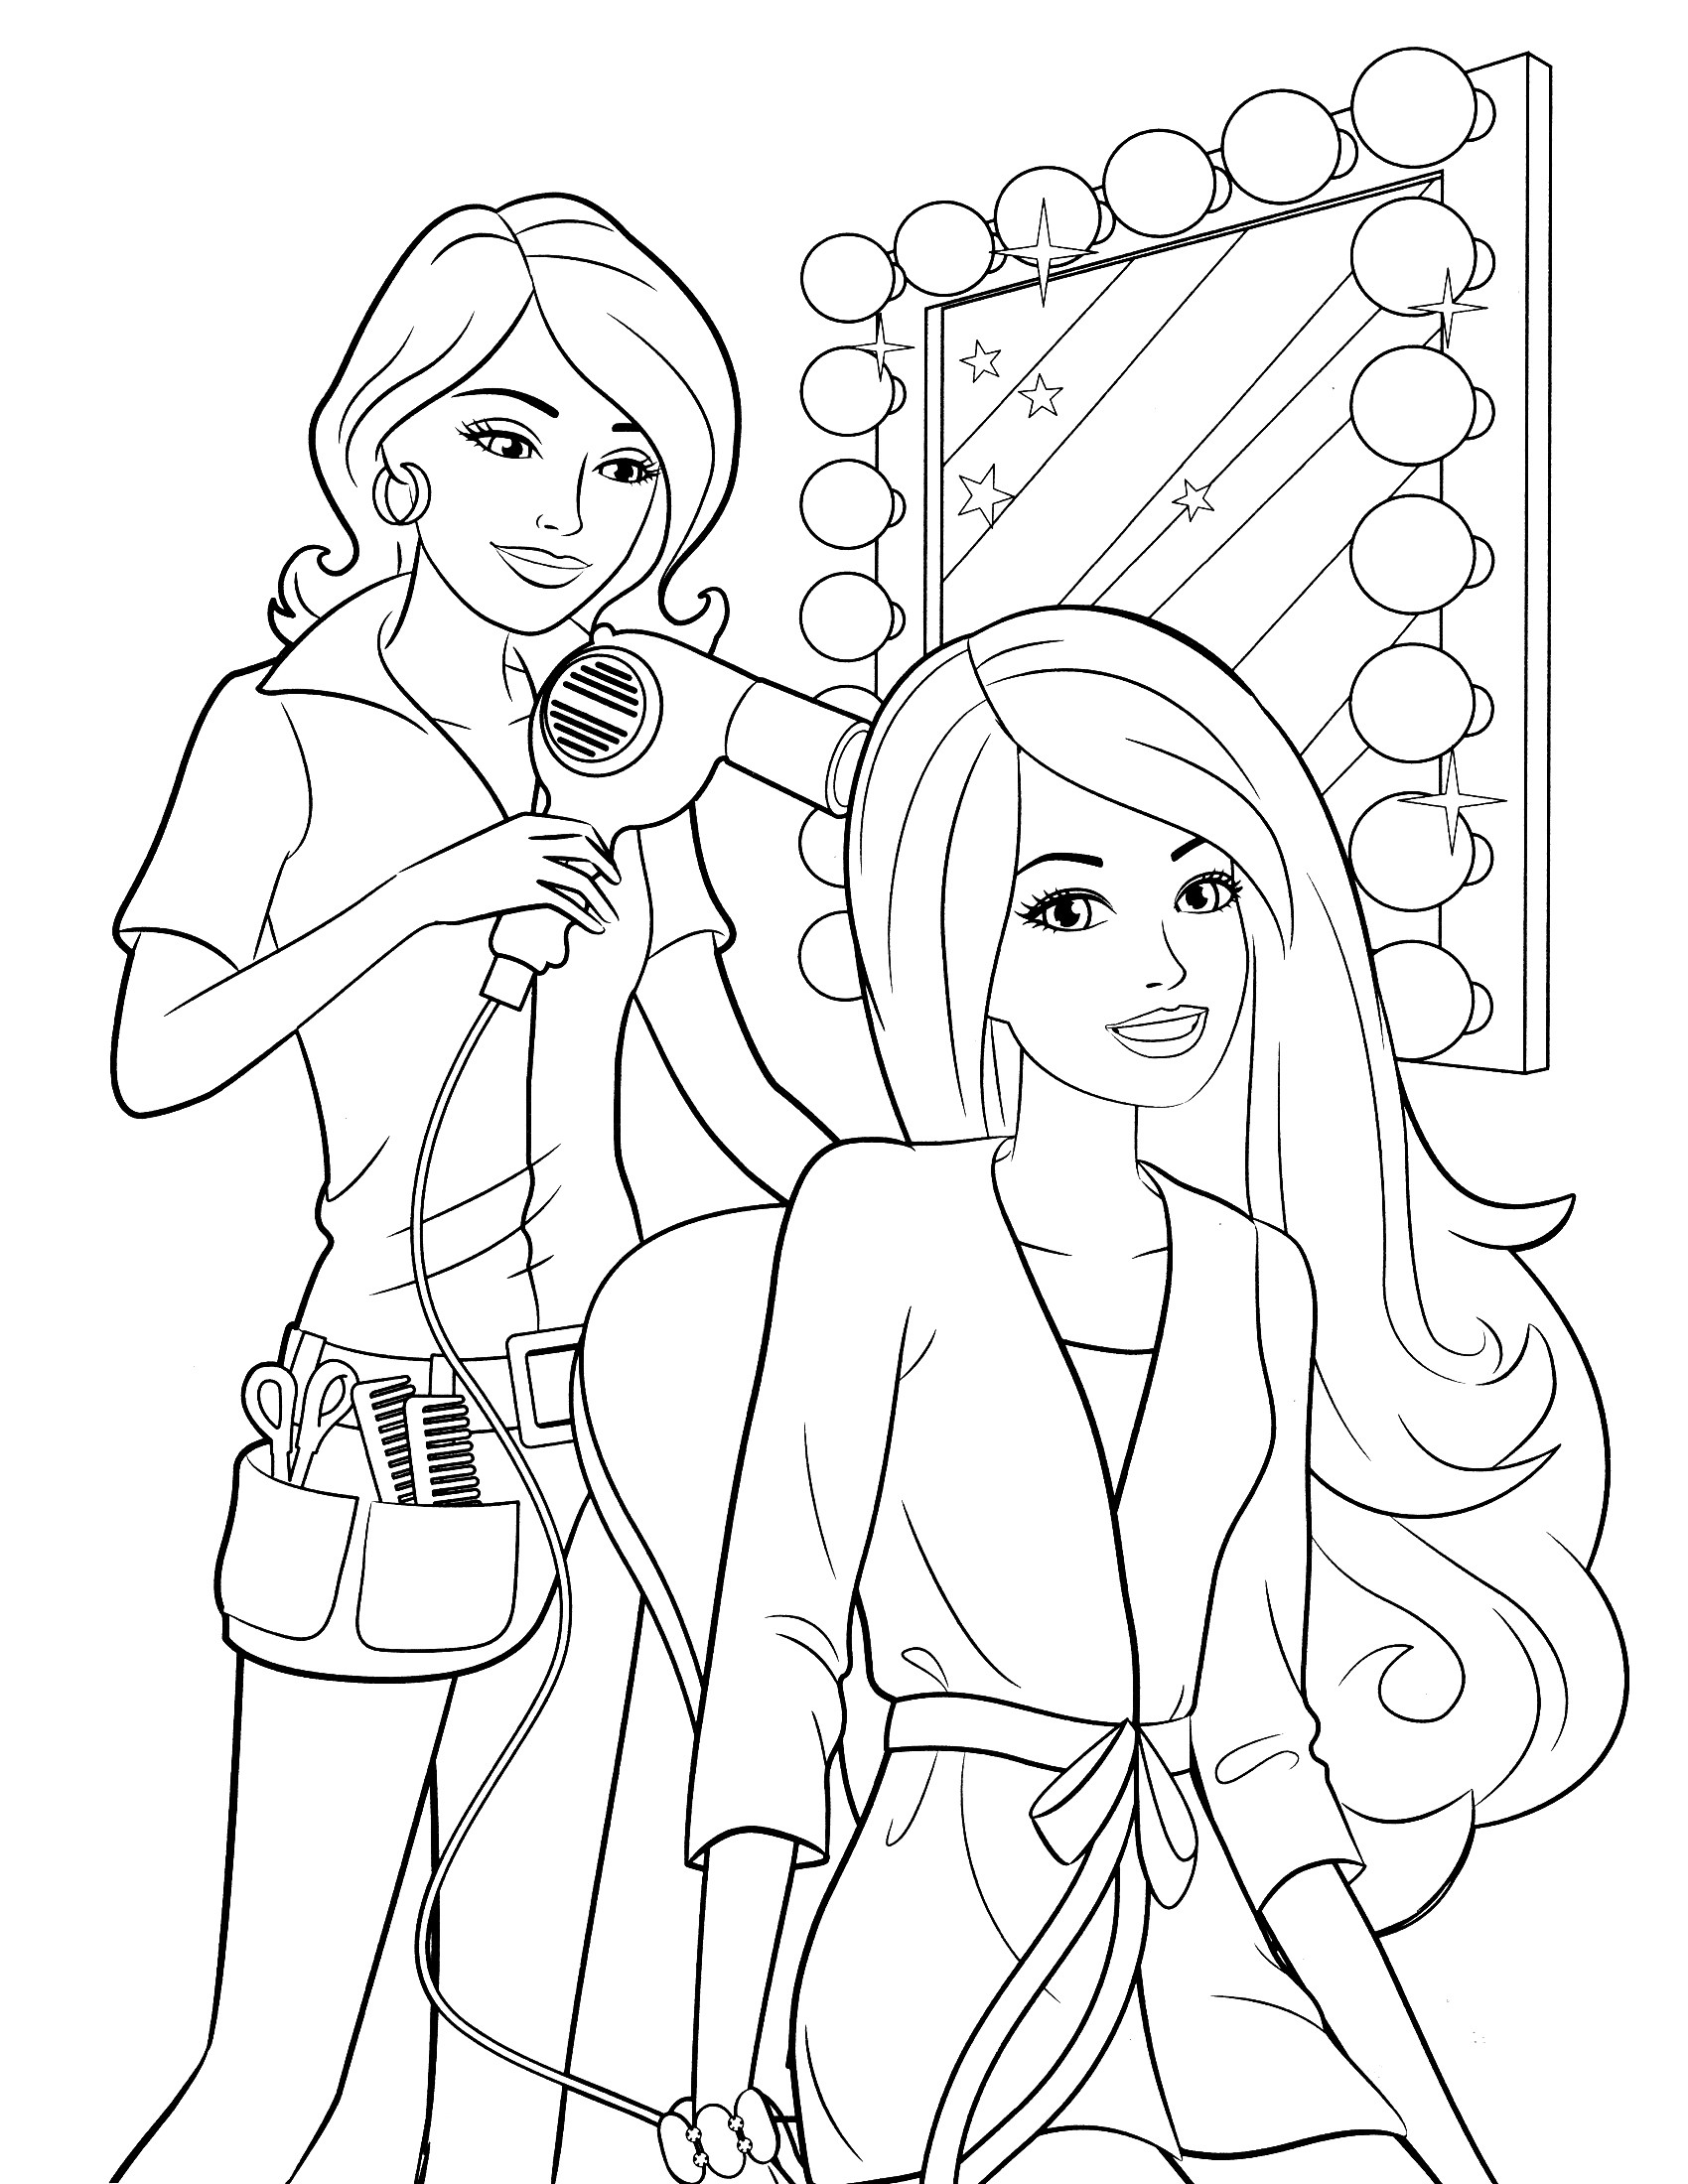 Cool Coloring Pages For Girls
 Coloring Pages for Girls Best Coloring Pages For Kids